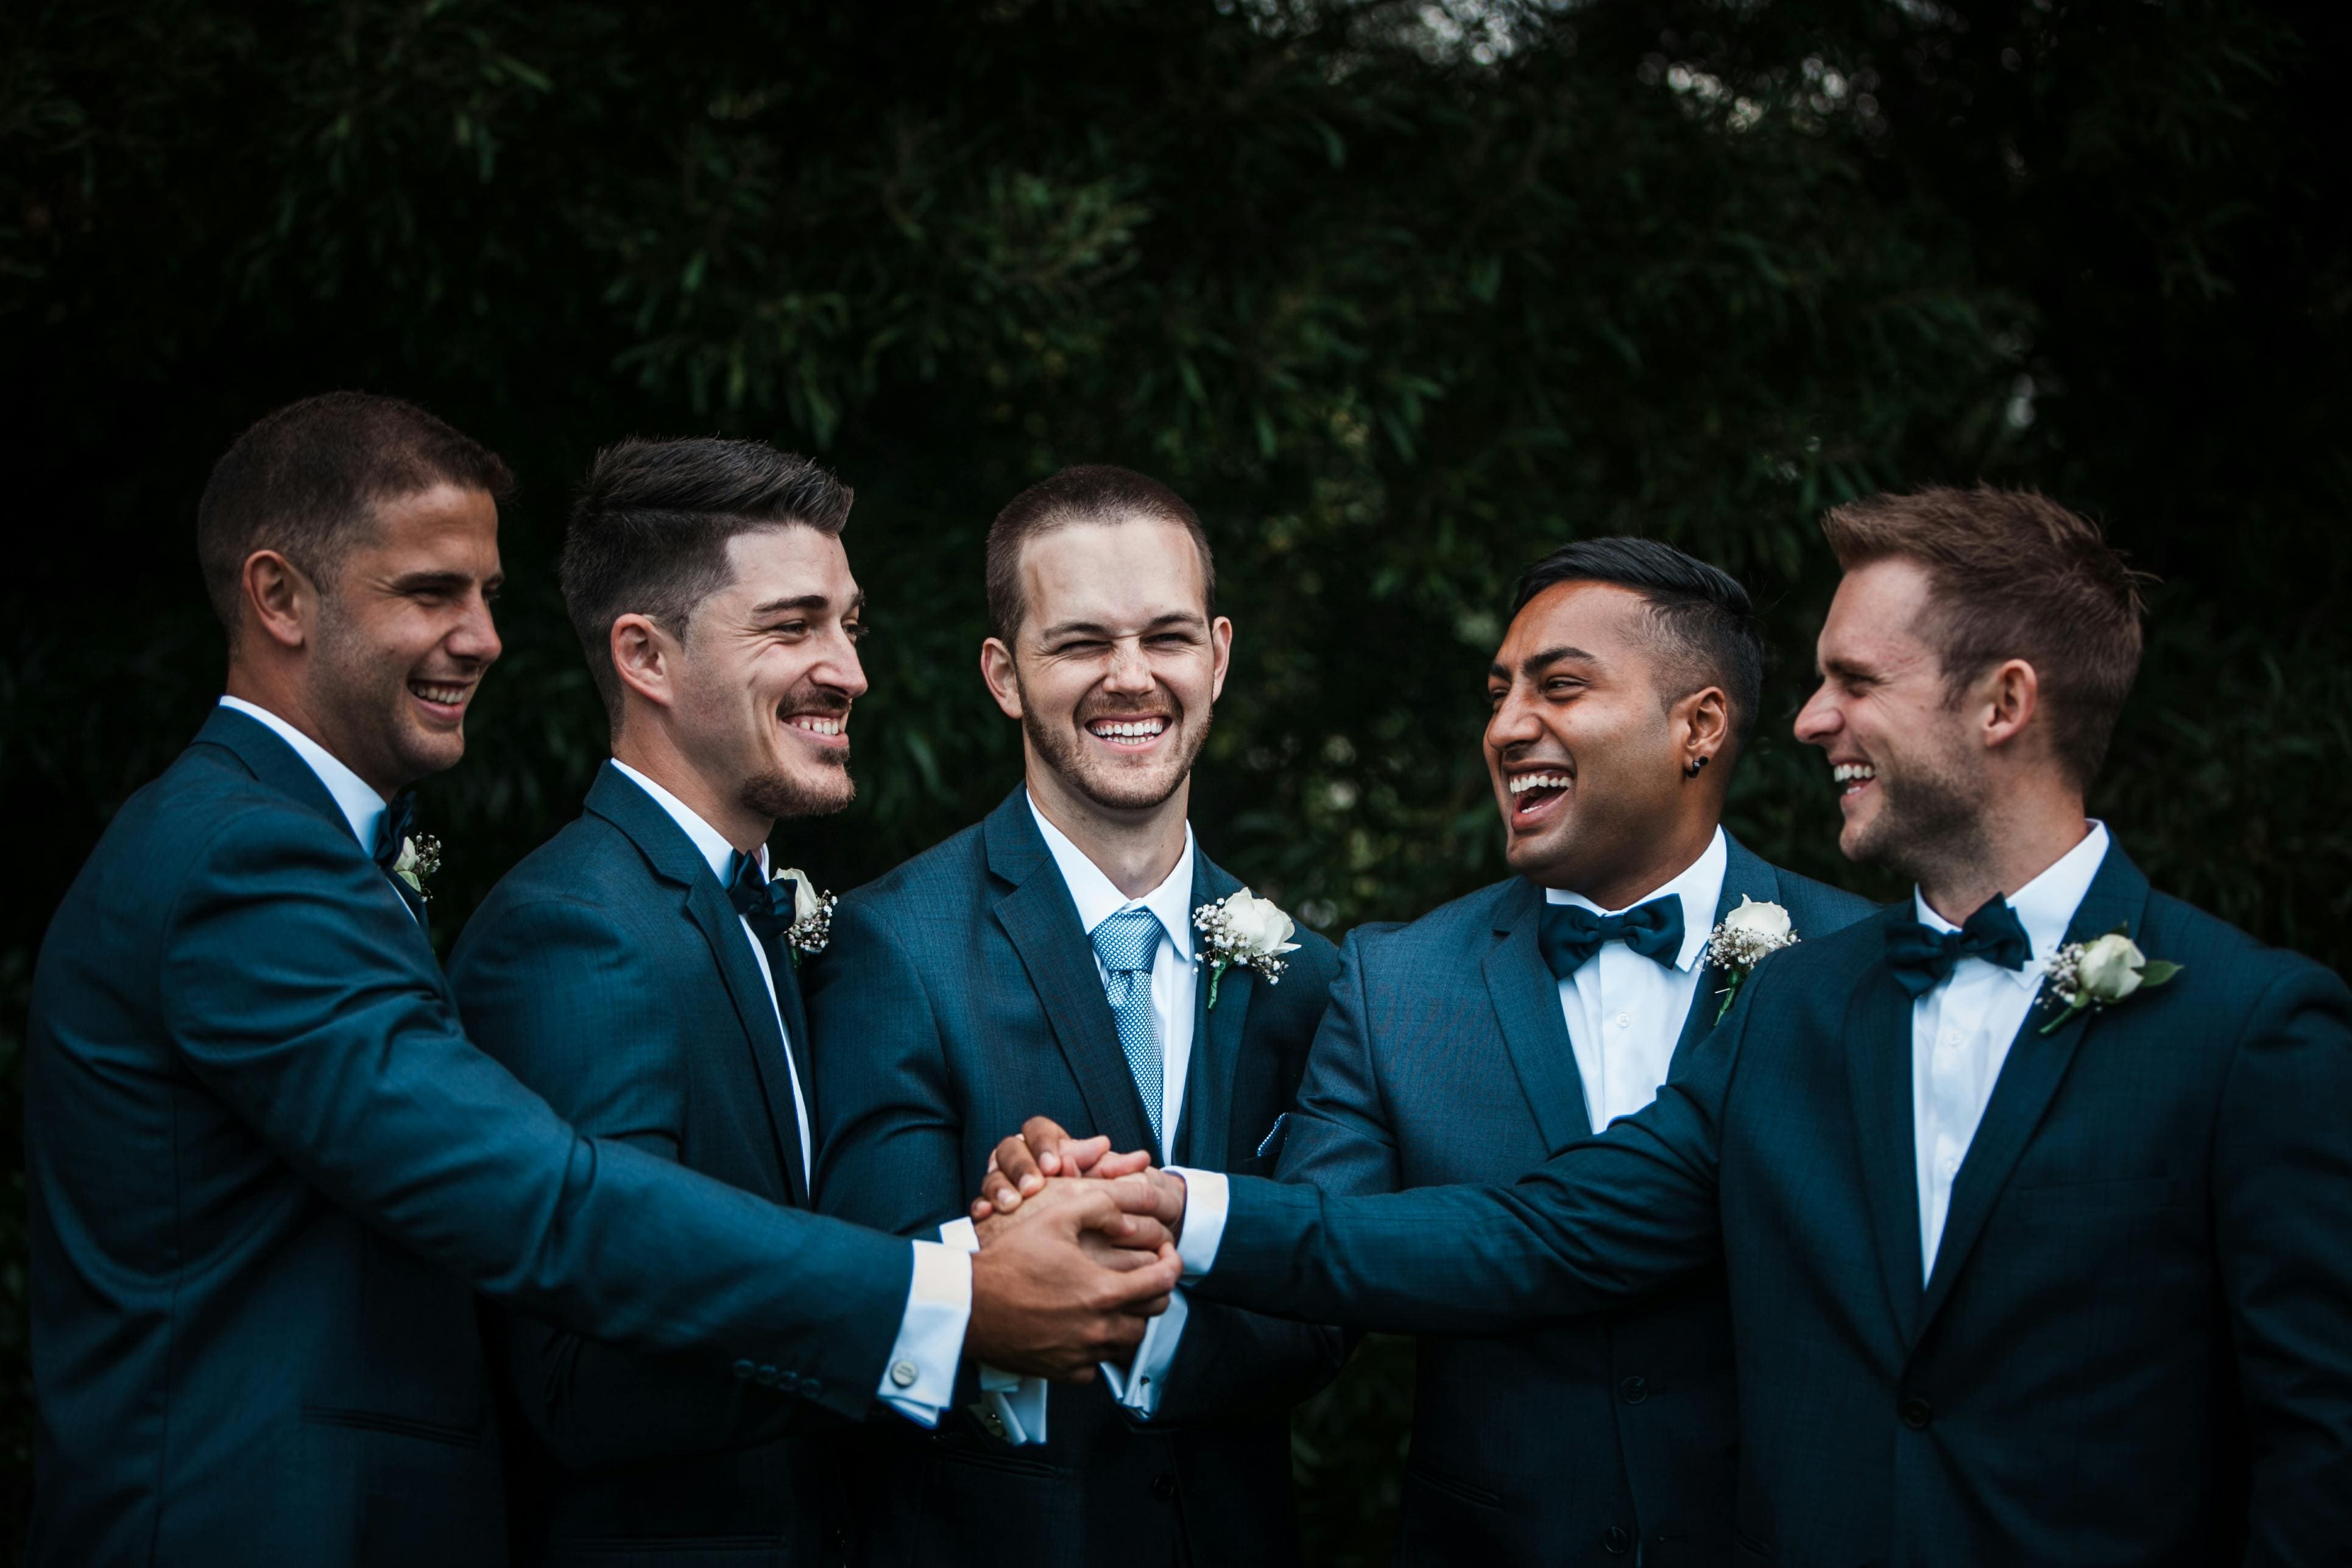 5 Memorable Groomsmen Gifts They’ll Actually Use